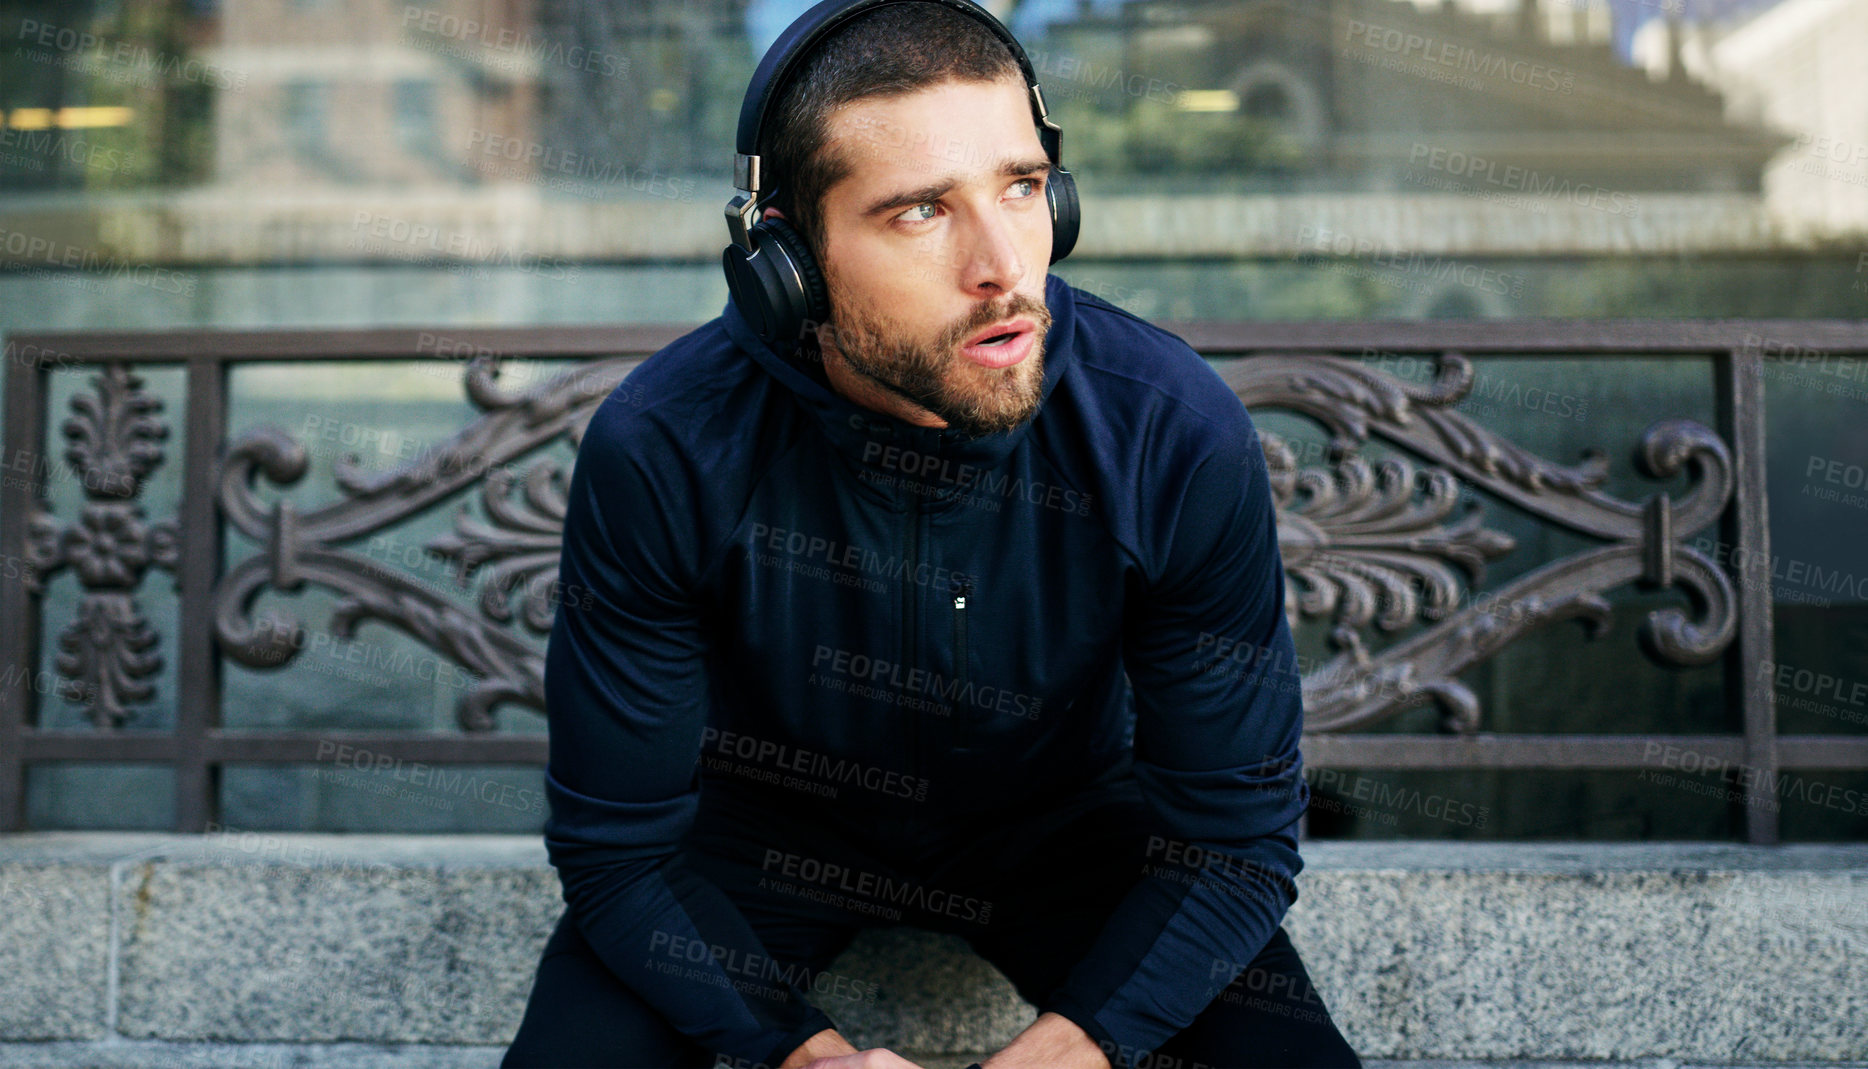 Buy stock photo Shot of a young man listening to music during a break from his workout in the city